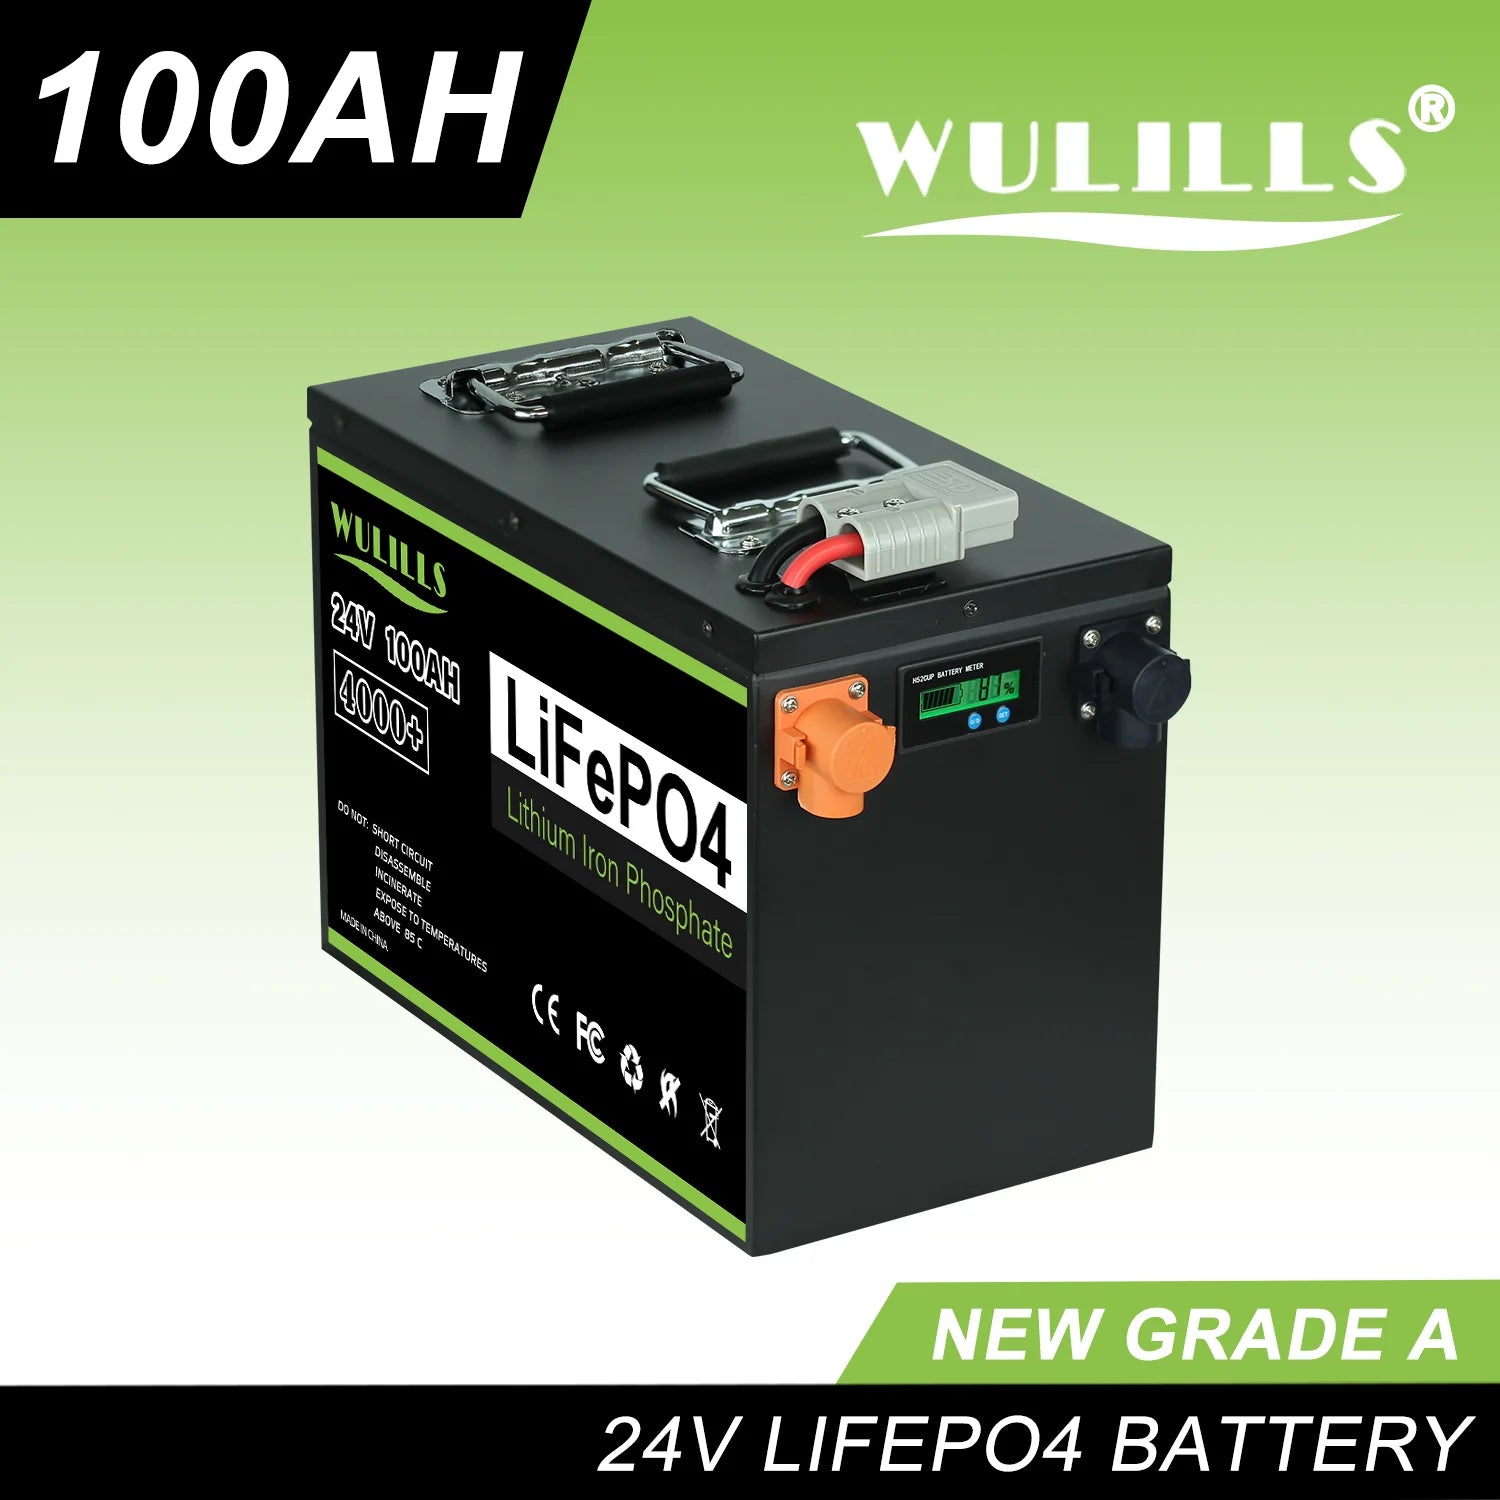 High-capacity LiFePO4 battery pack for solar boats with built-in BMS and 12V/24V/48V options.